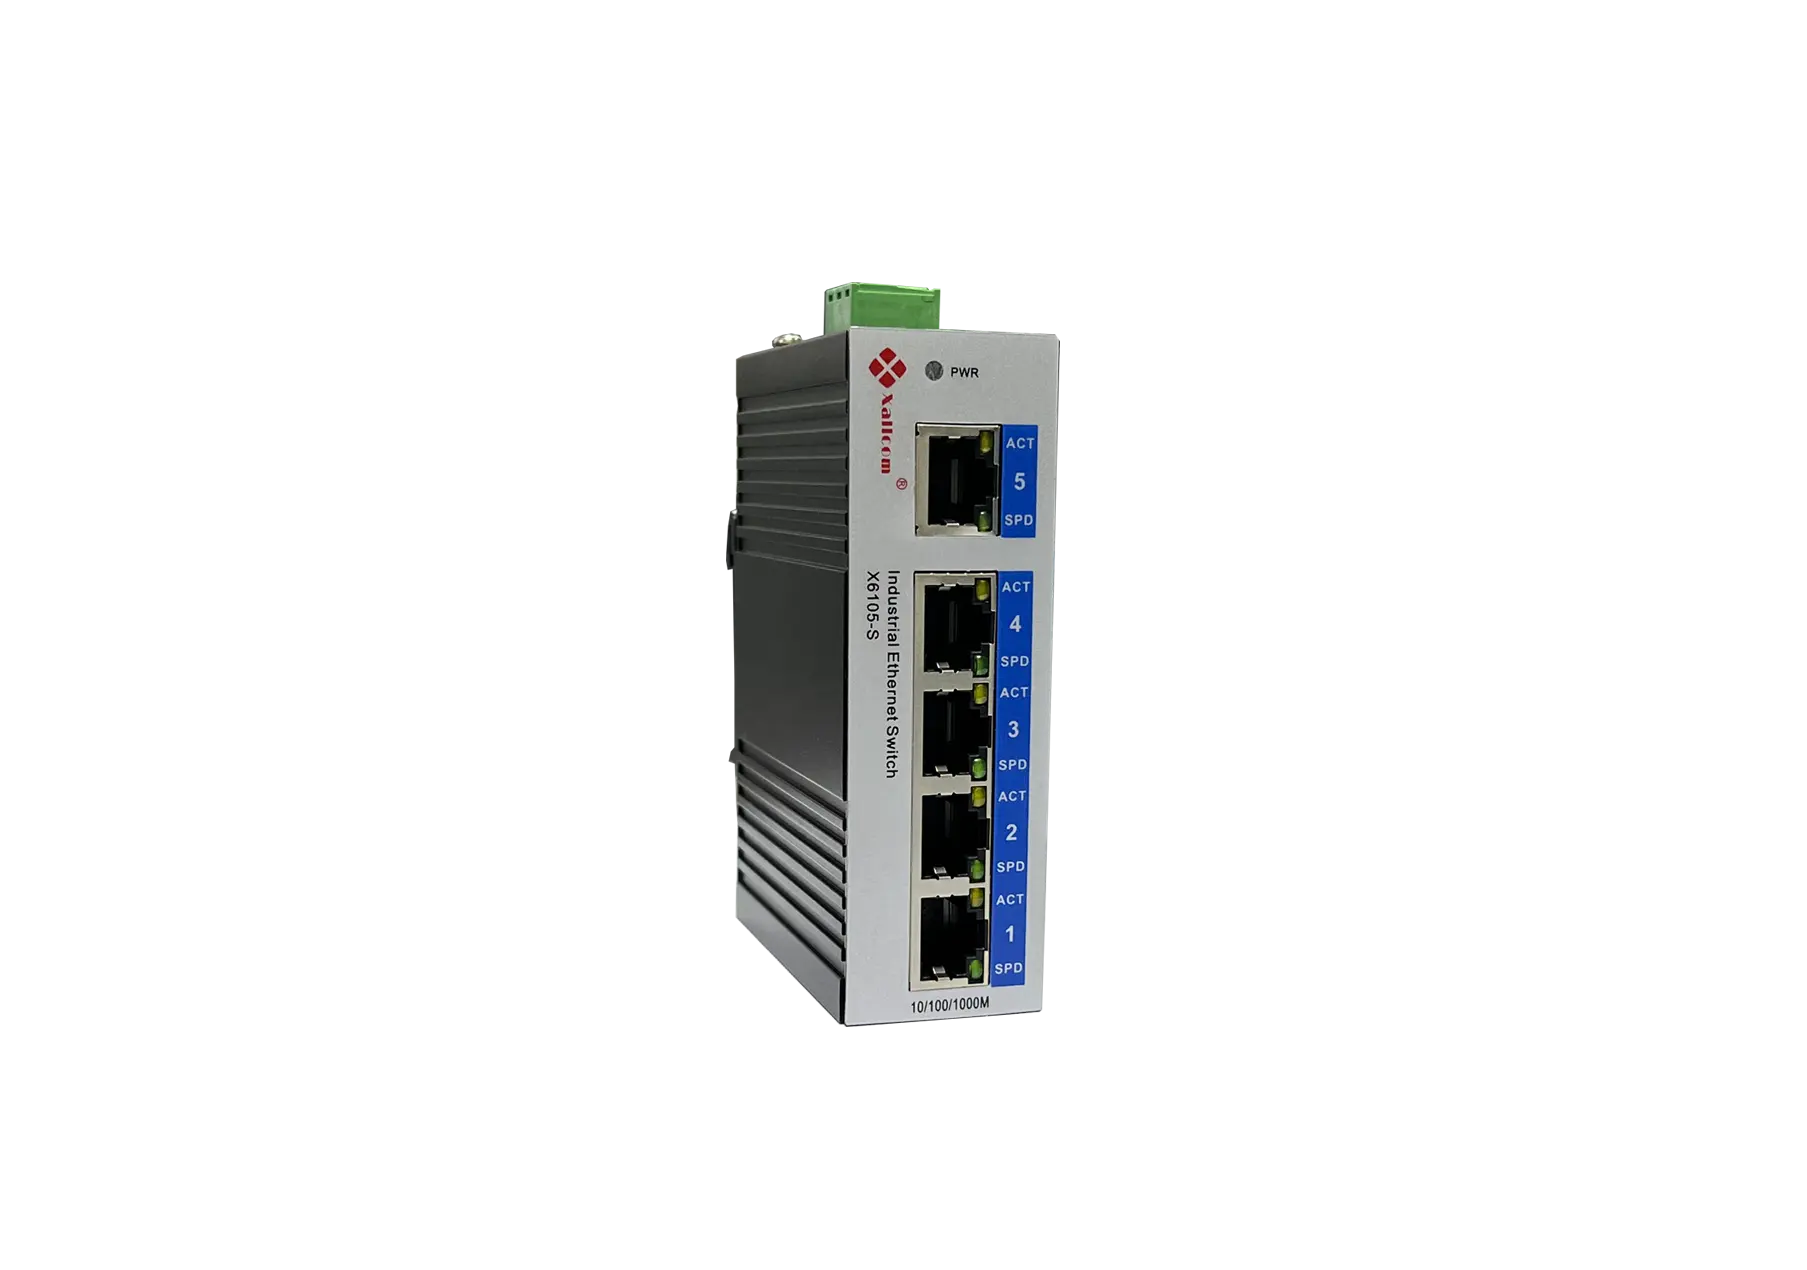 5 10 100Base T 1000Base TX RJ45 Self adaptive Port DC12 48V 65W Full Load Power Consumption Mini Unmanaged Industrial Switch